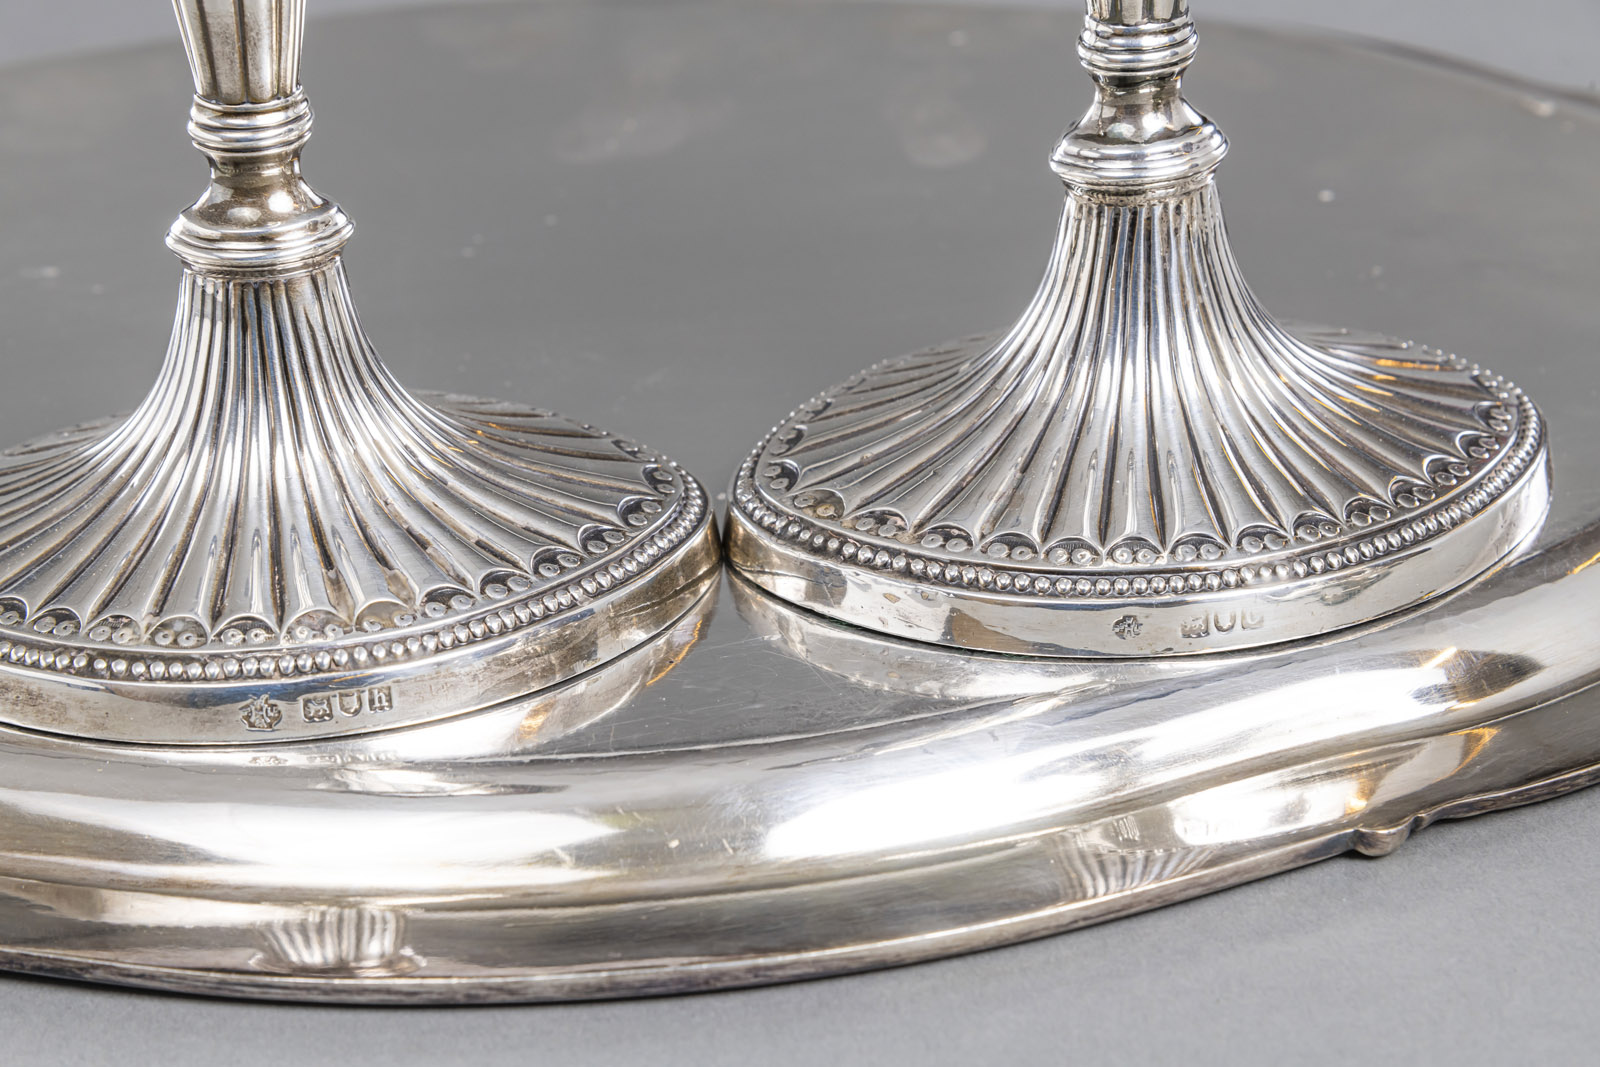 TWO PAIR OF LONDON SILVER CANDLESTICKS AND A GERMAN TRAY - Image 6 of 8